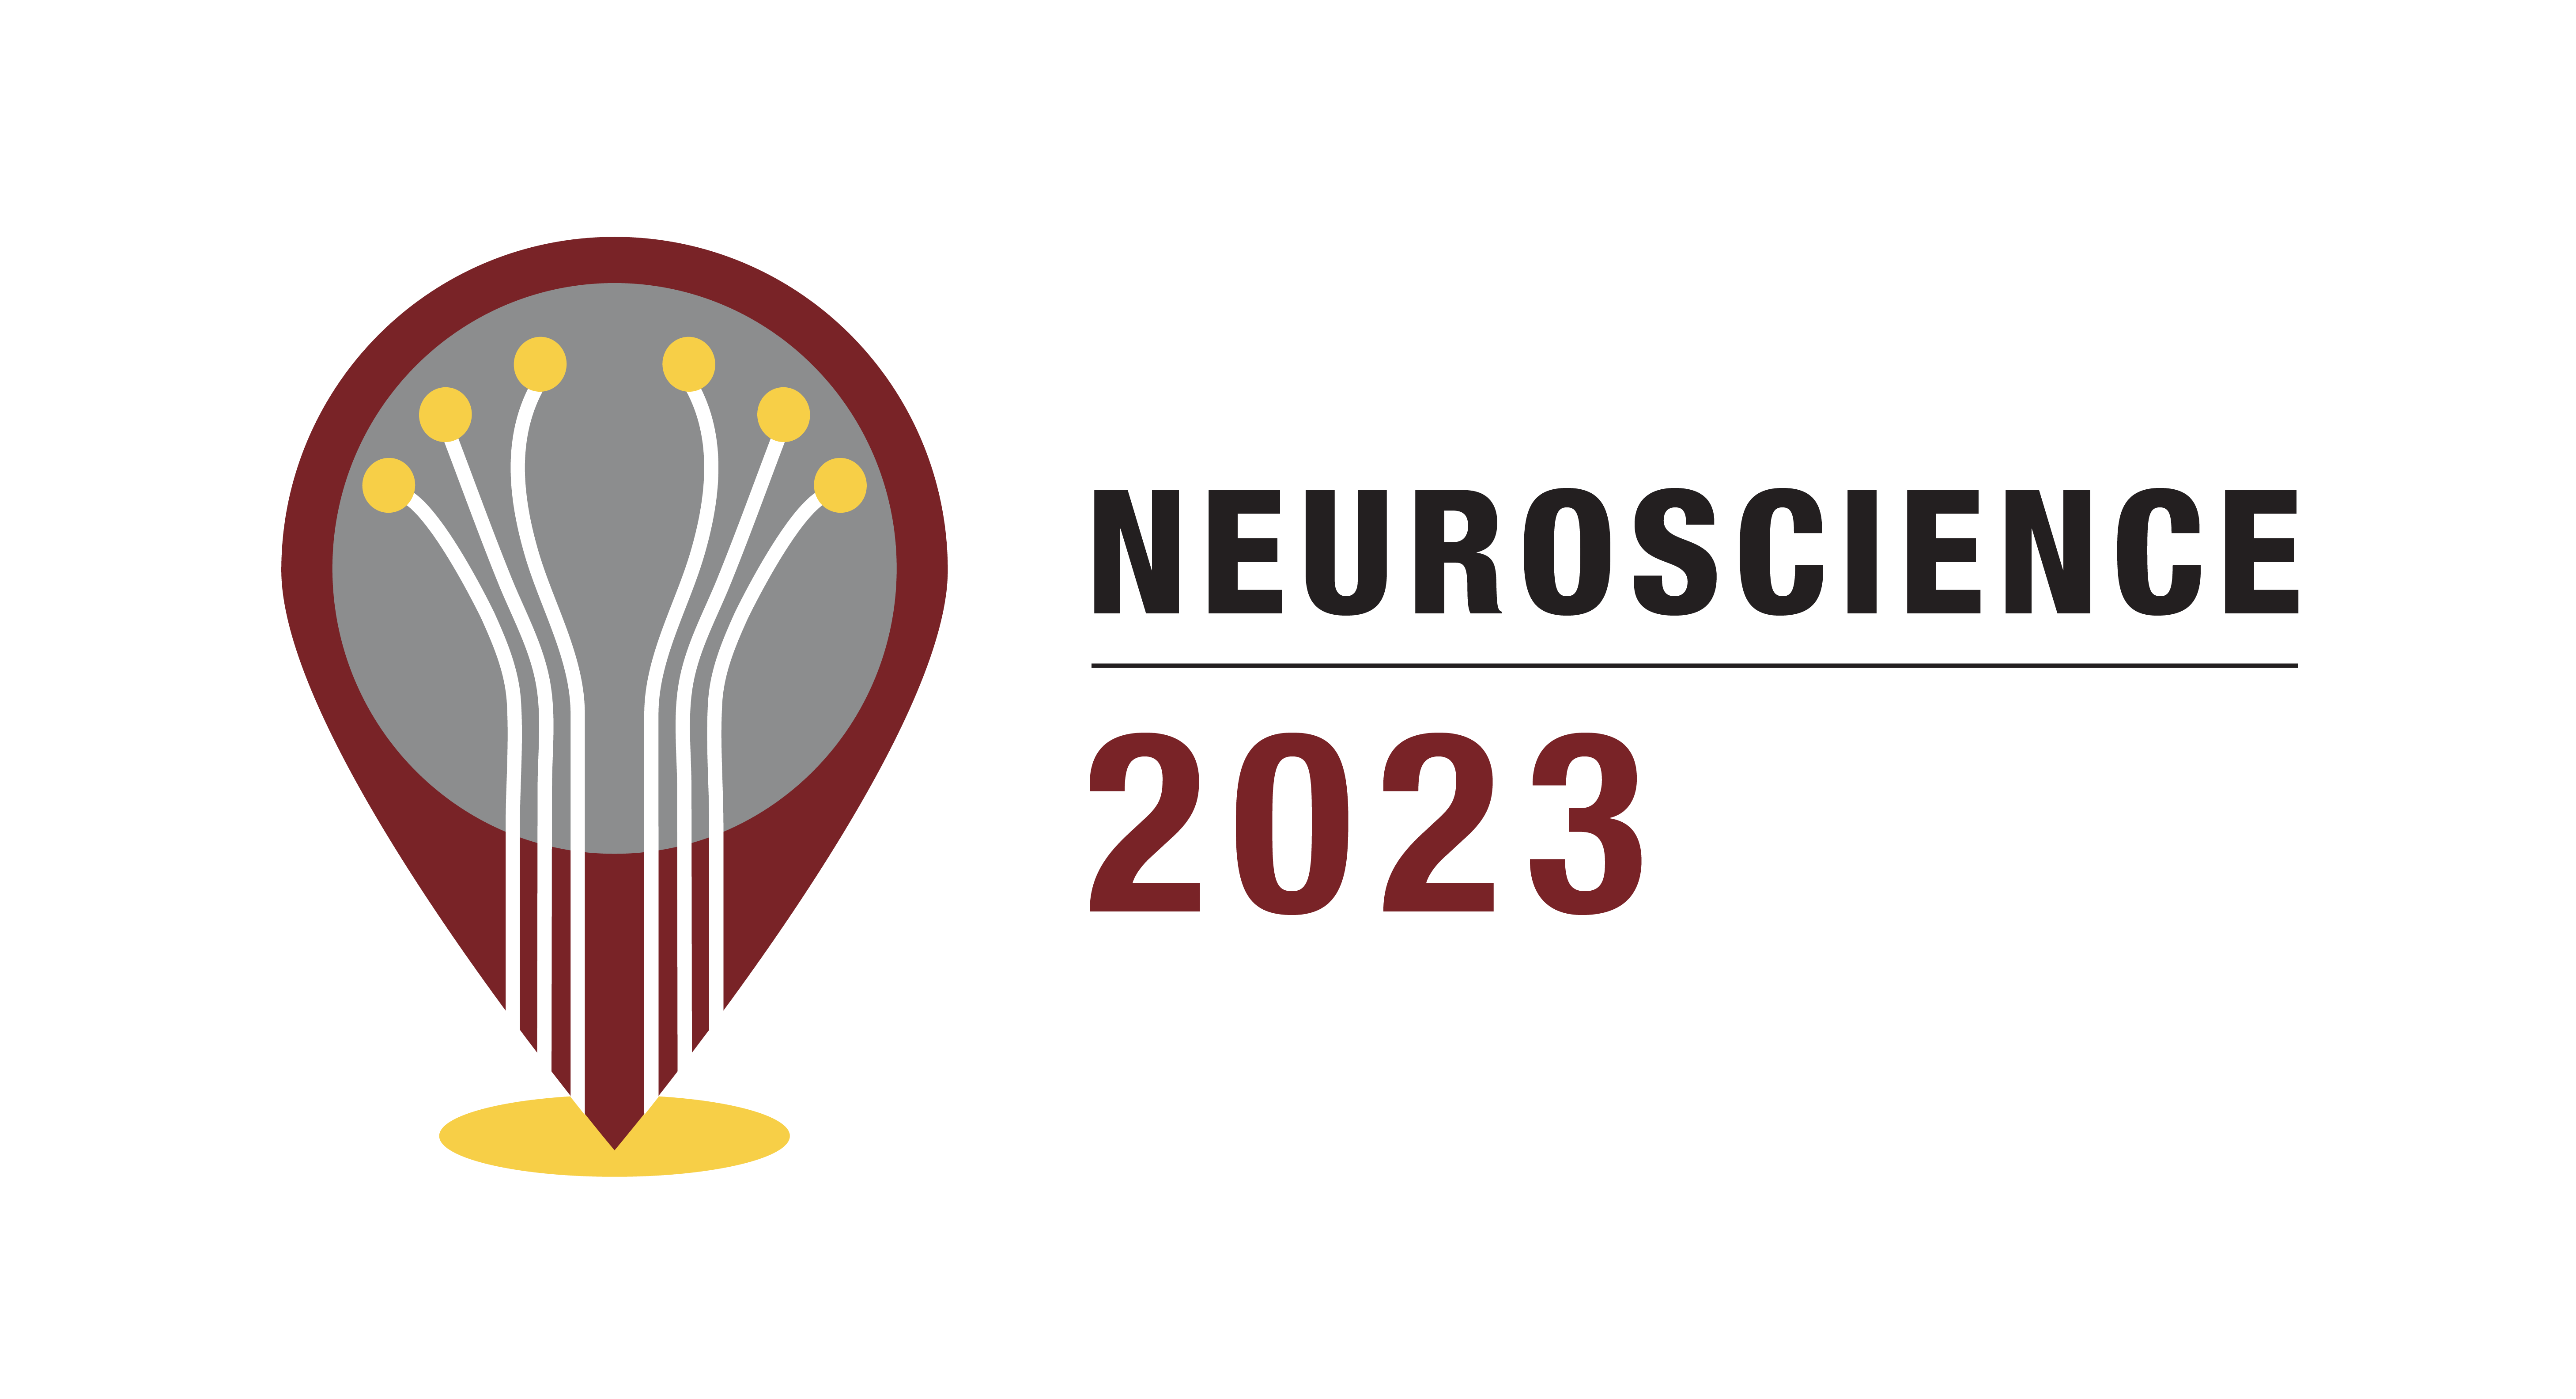 Welcome to Neuroscience 2023